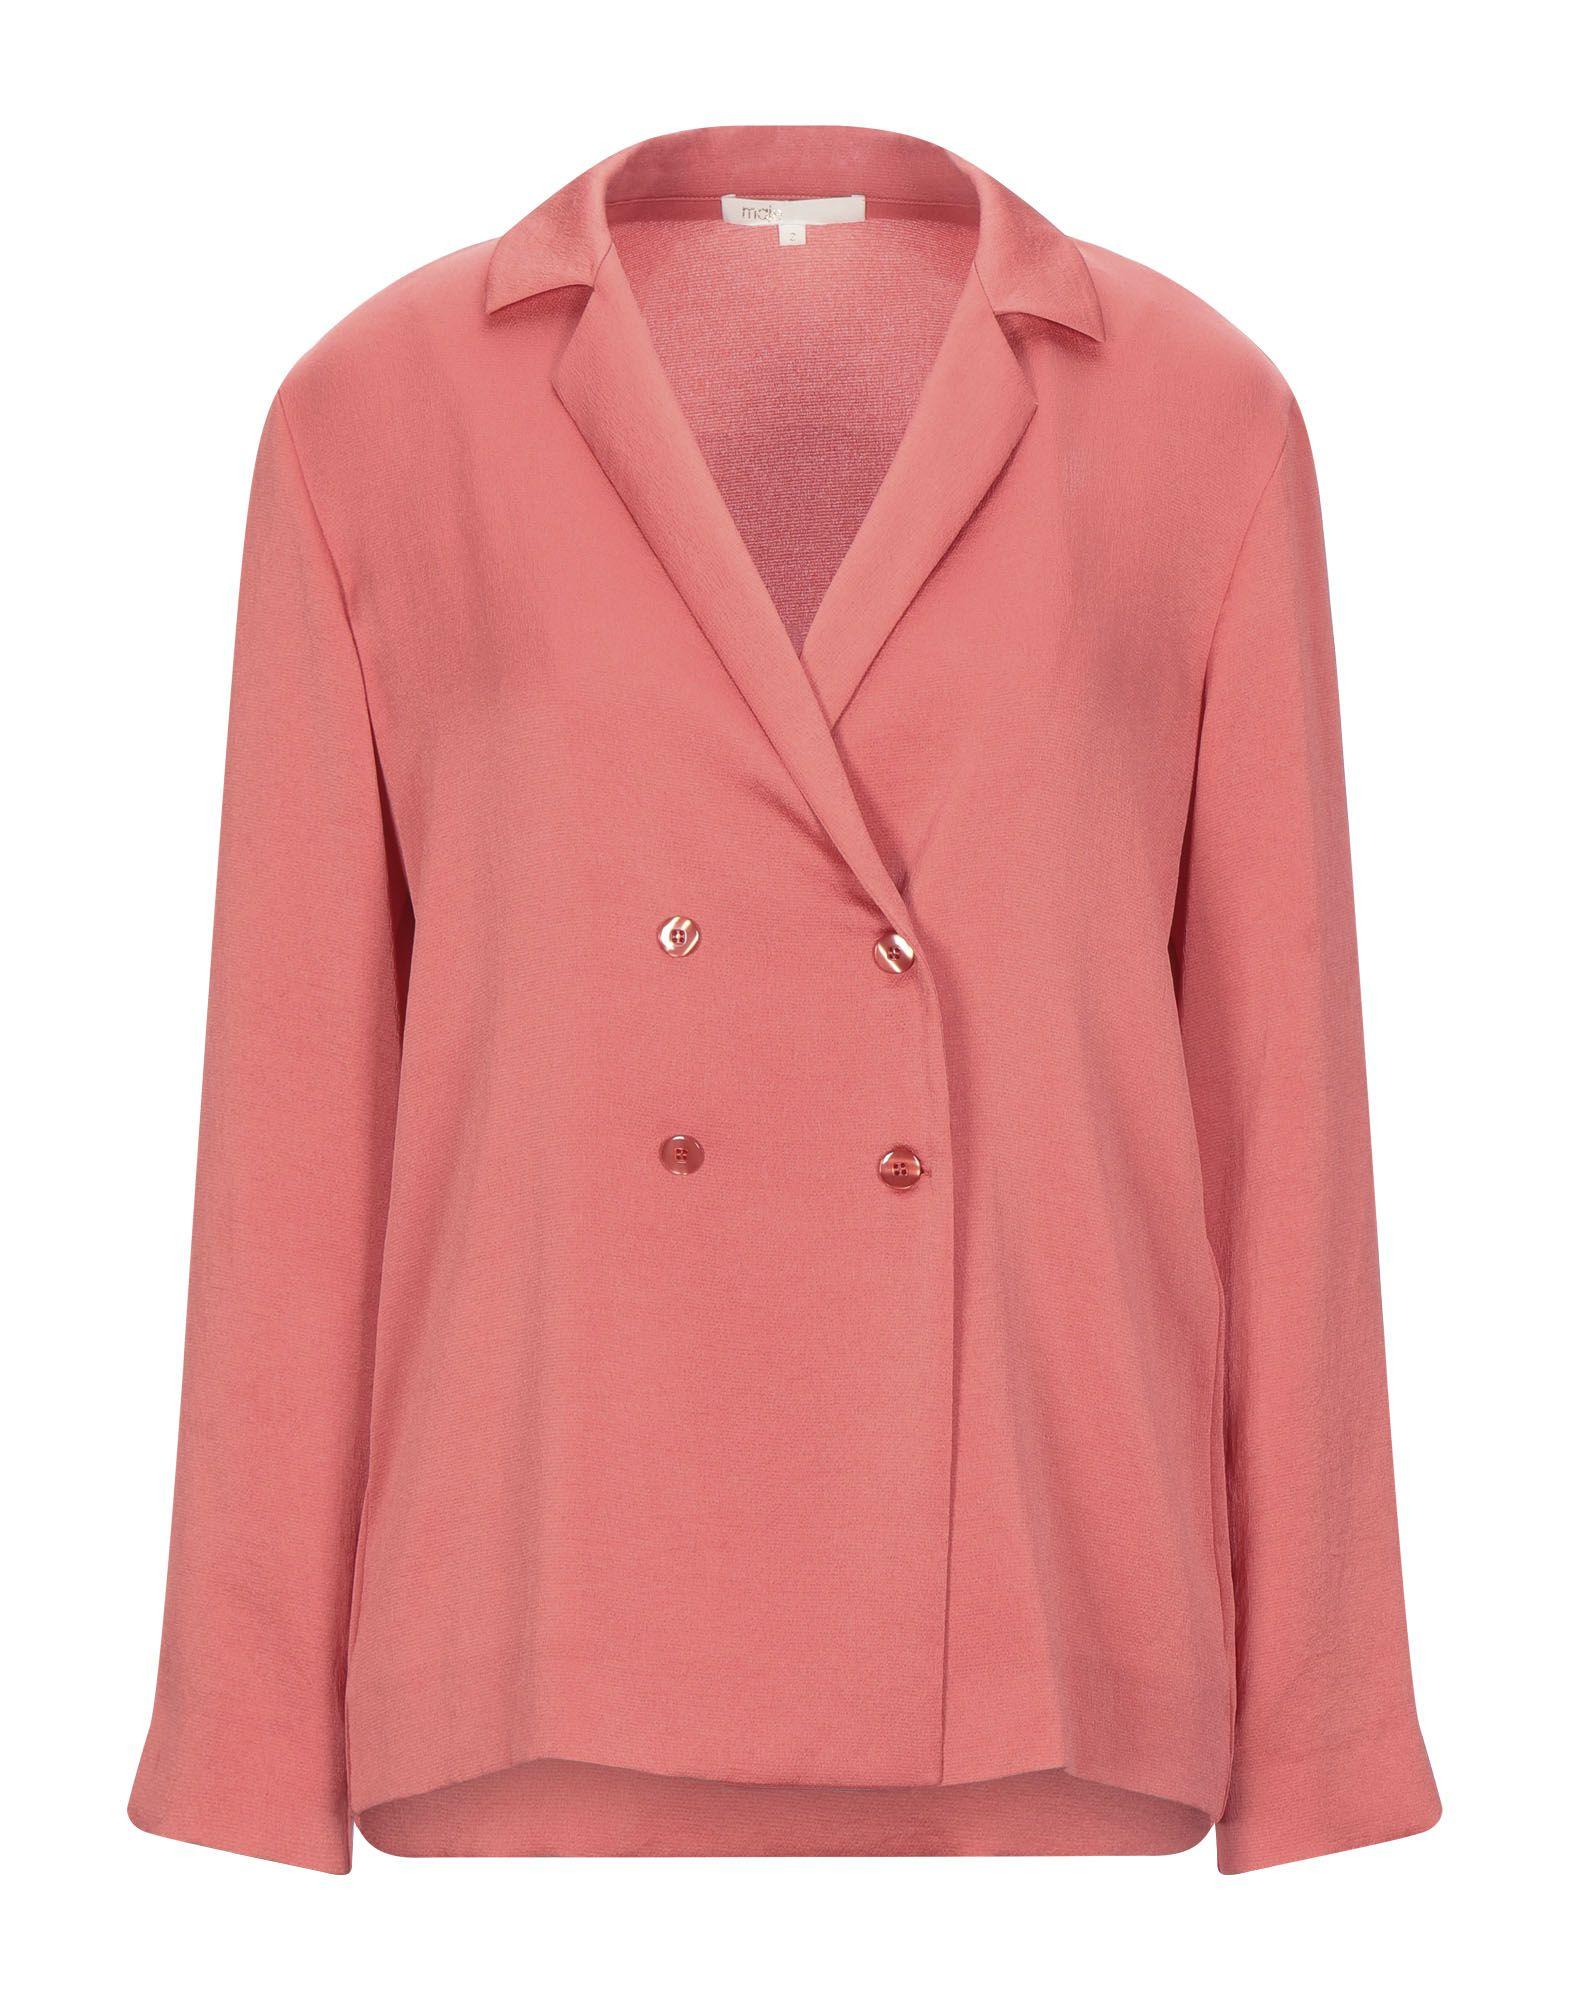 Maje Synthetic Suit Jacket in Coral (Pink) - Lyst